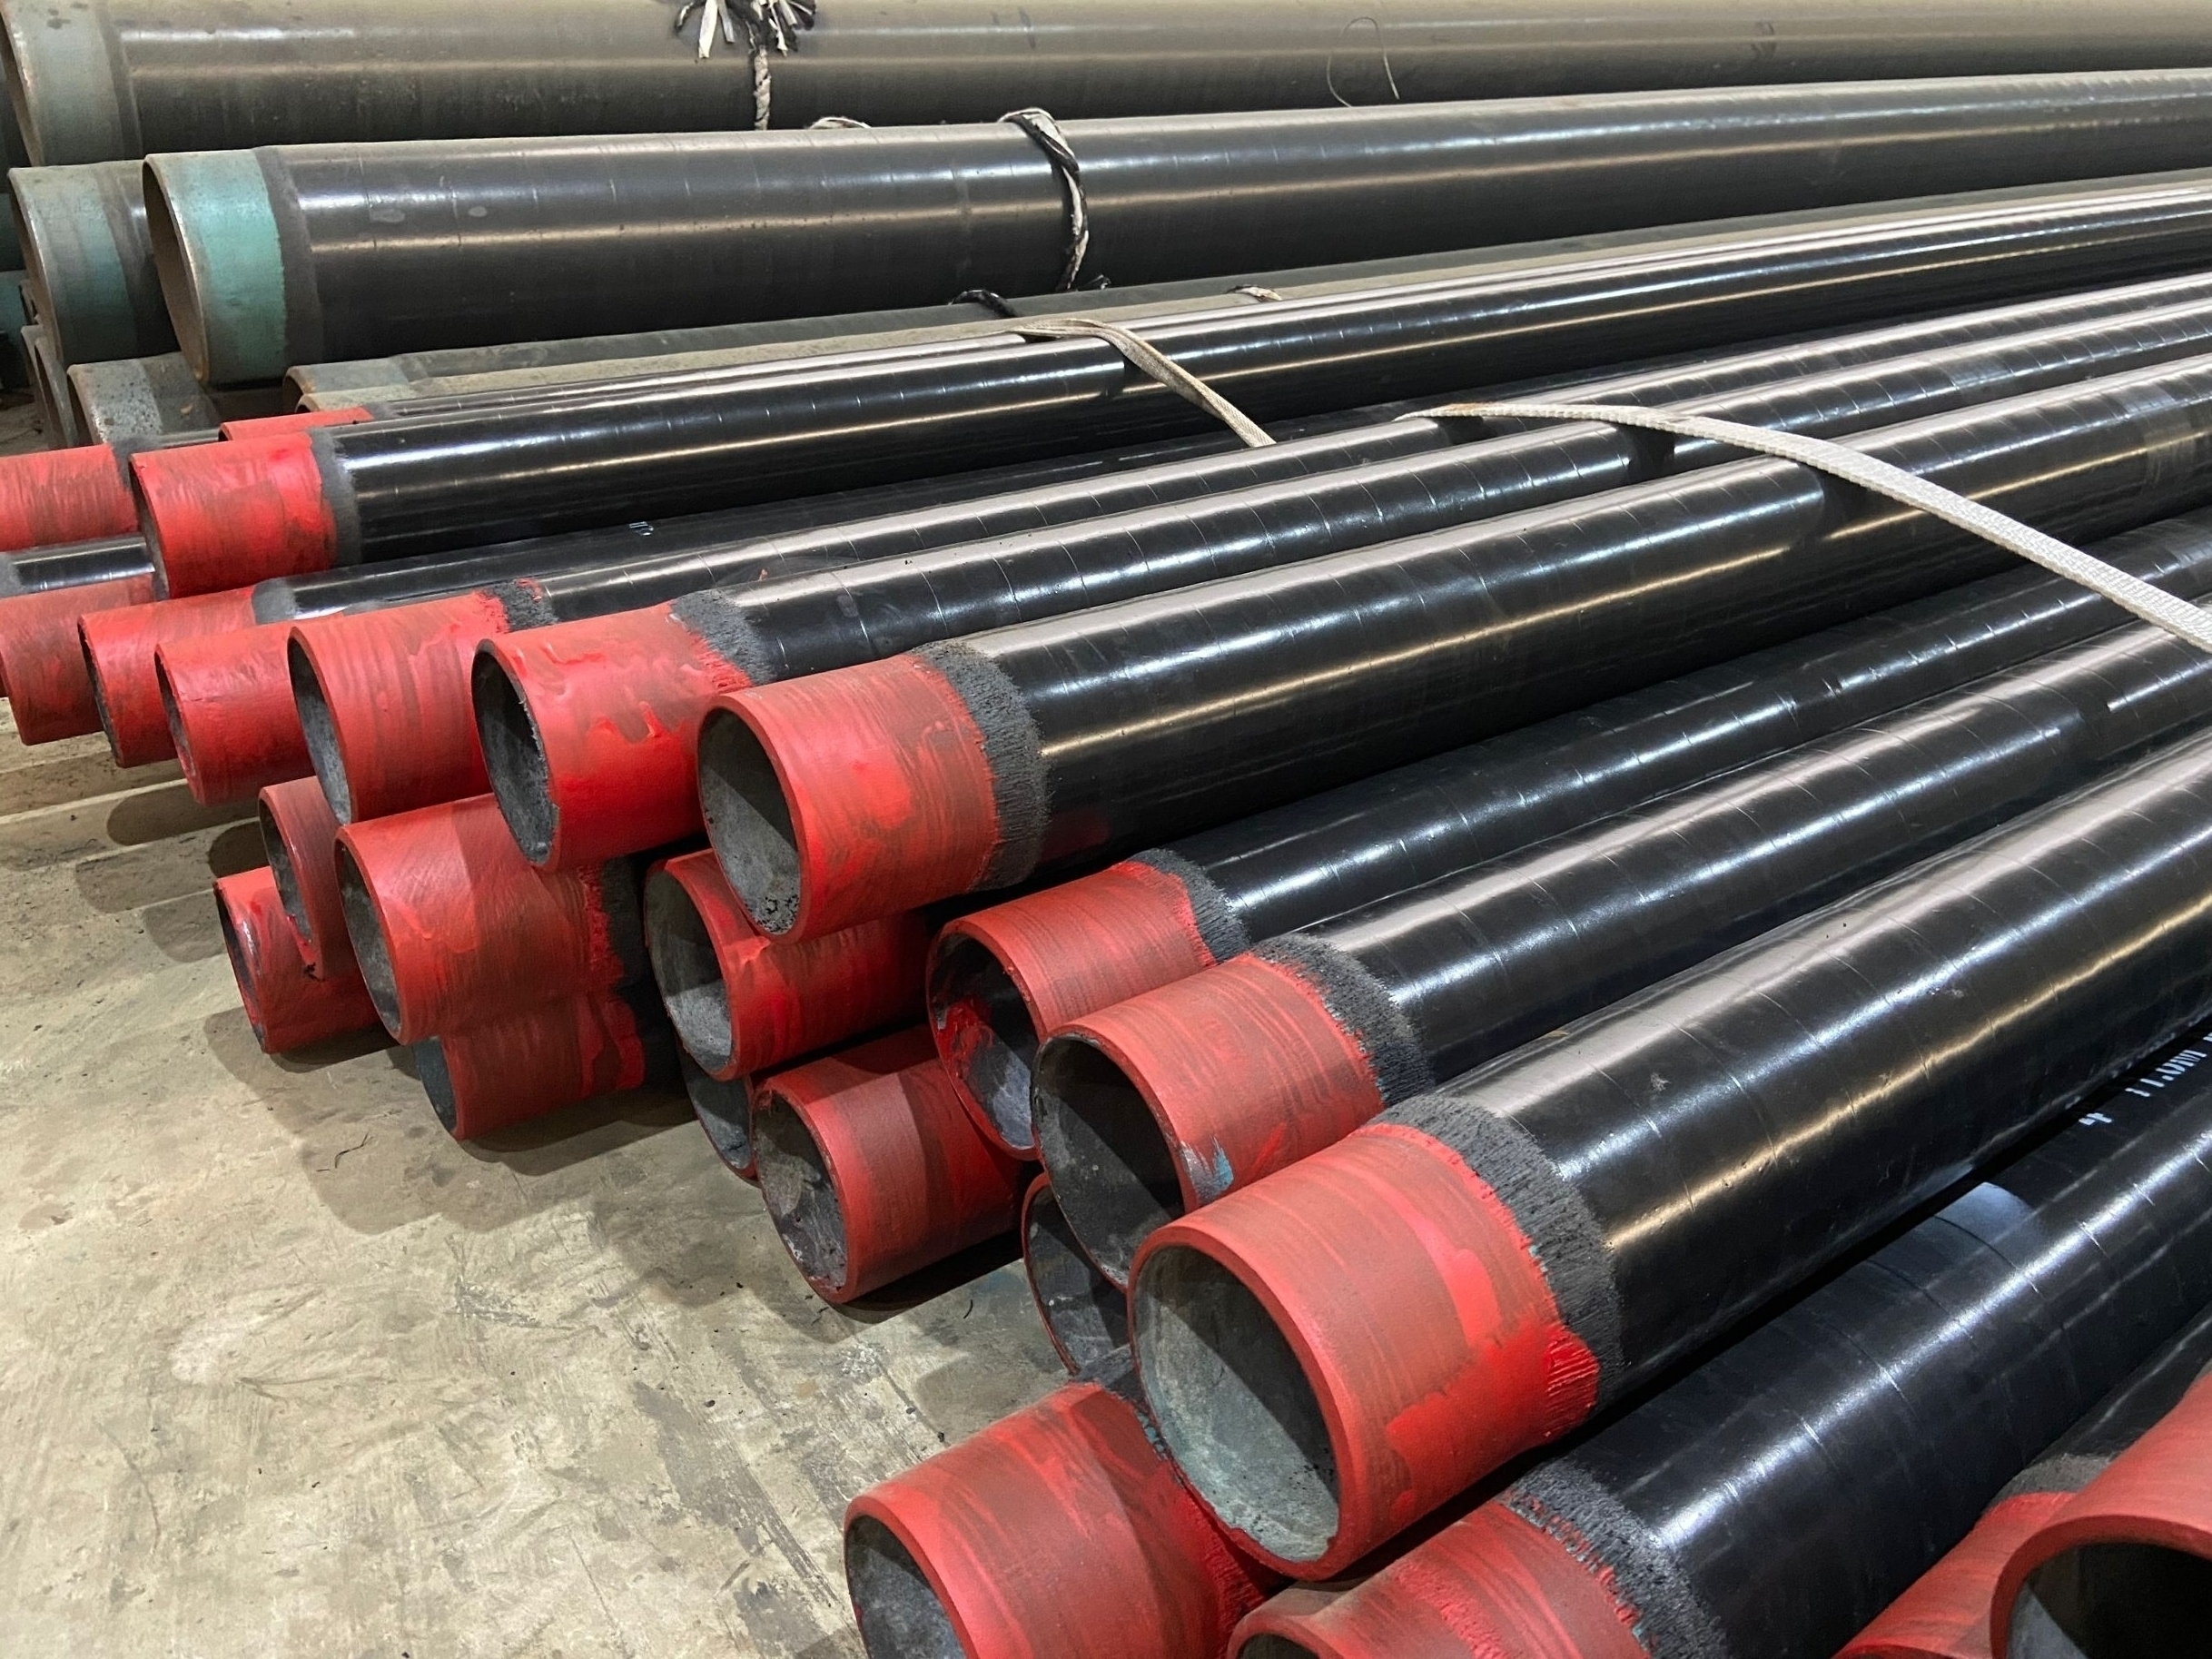  3LPE Anti-Corrosive Coating Seamless Carbon Steel Pipes